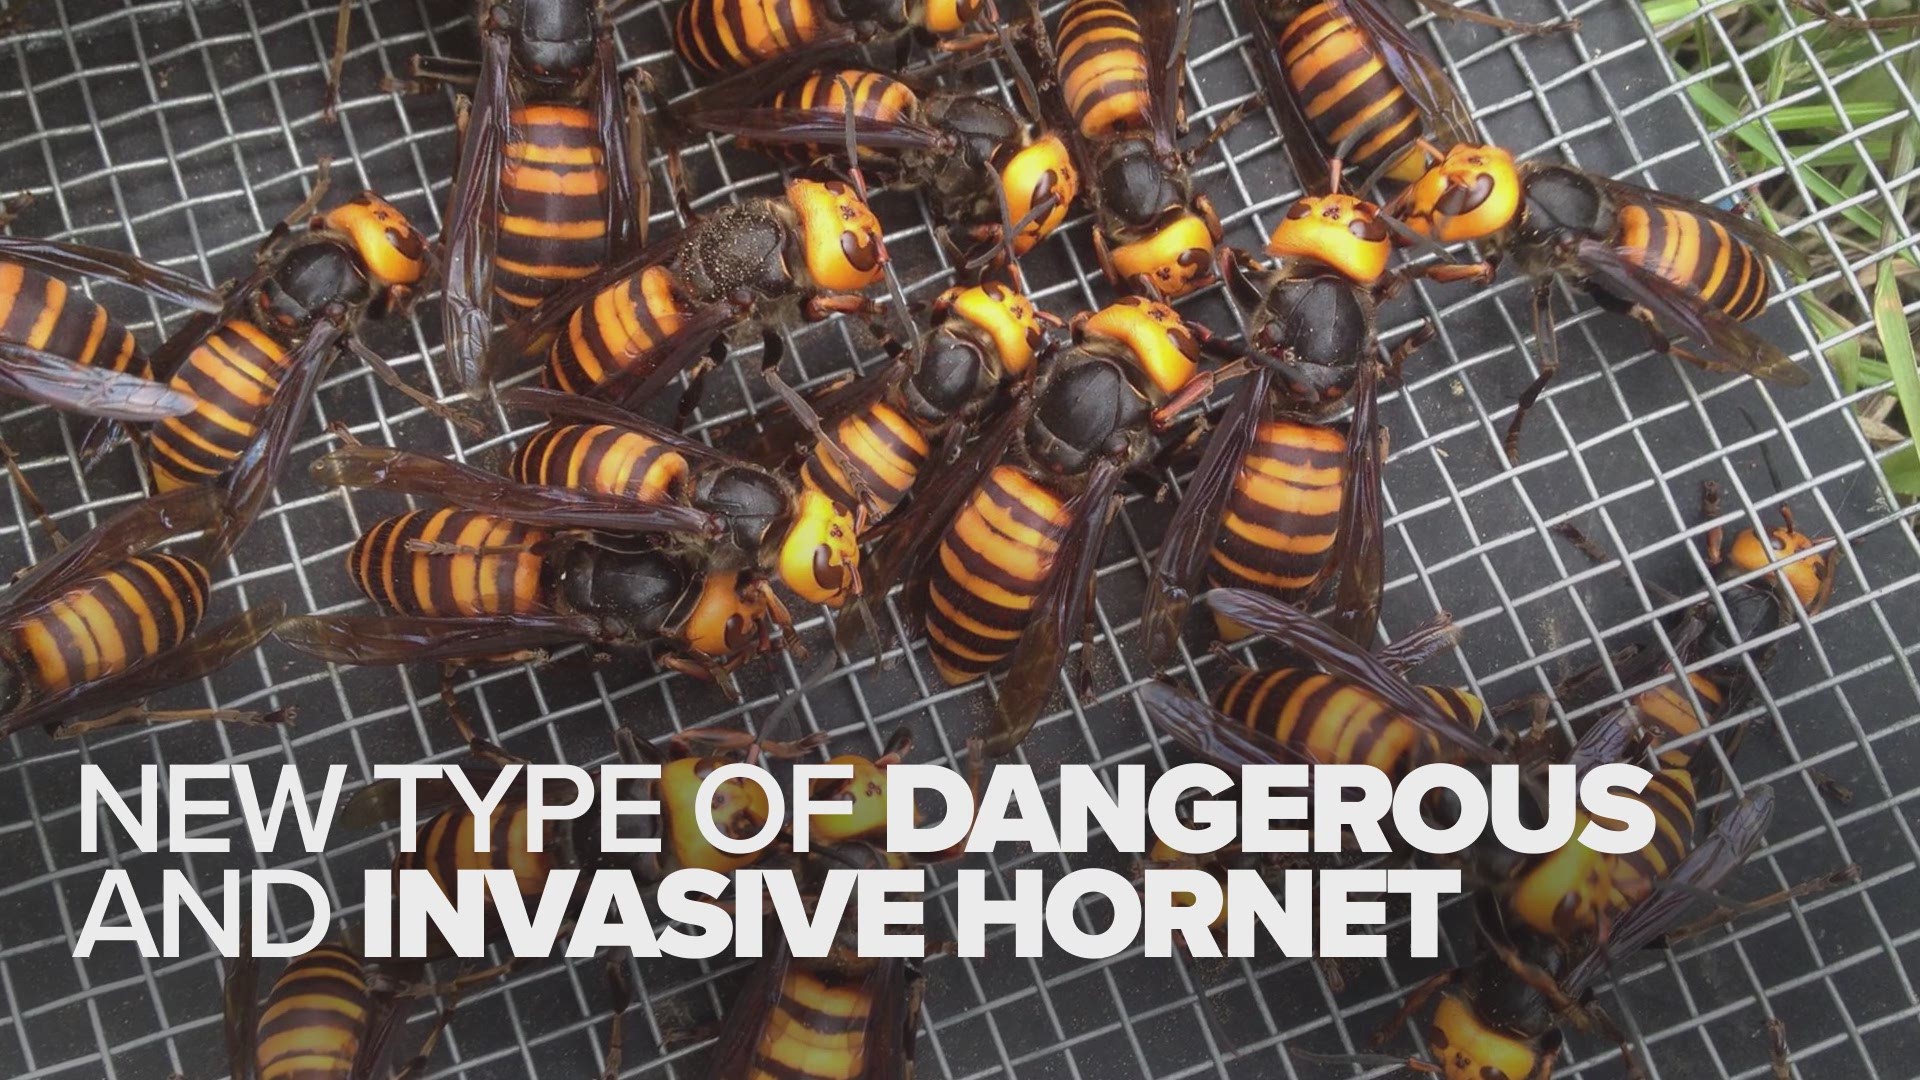 The world's largest hornet, a 2-inch killer dubbed the "Murder Hornet" with an appetite for honey bees, has been found in the U.S.